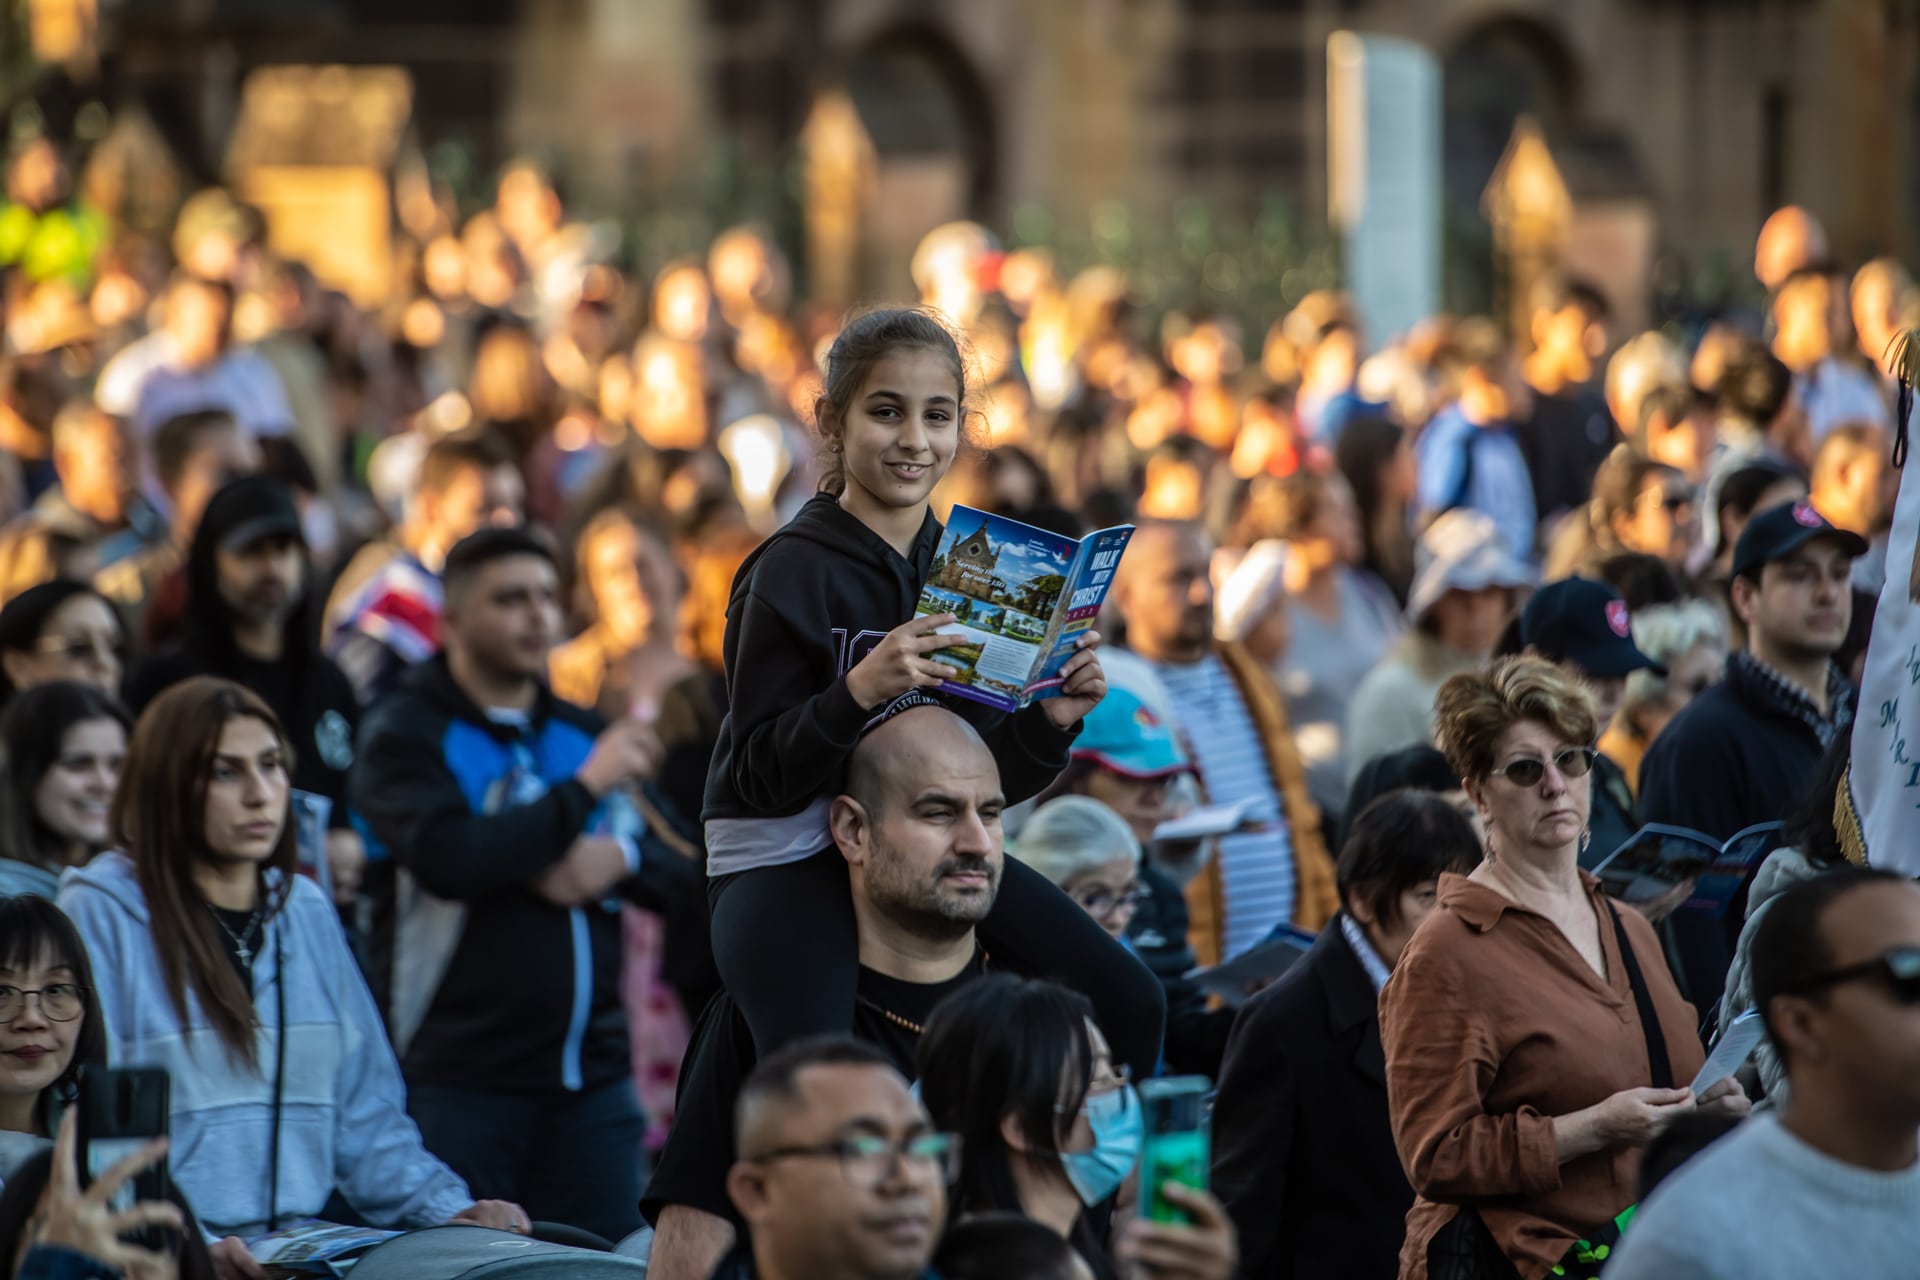 Thousands walk through the city of Sydney towards St Mary’s Cathedral for the Walk with Christ Eucharisti procession on 11 June 2023. Photo: Giovanni Portelli